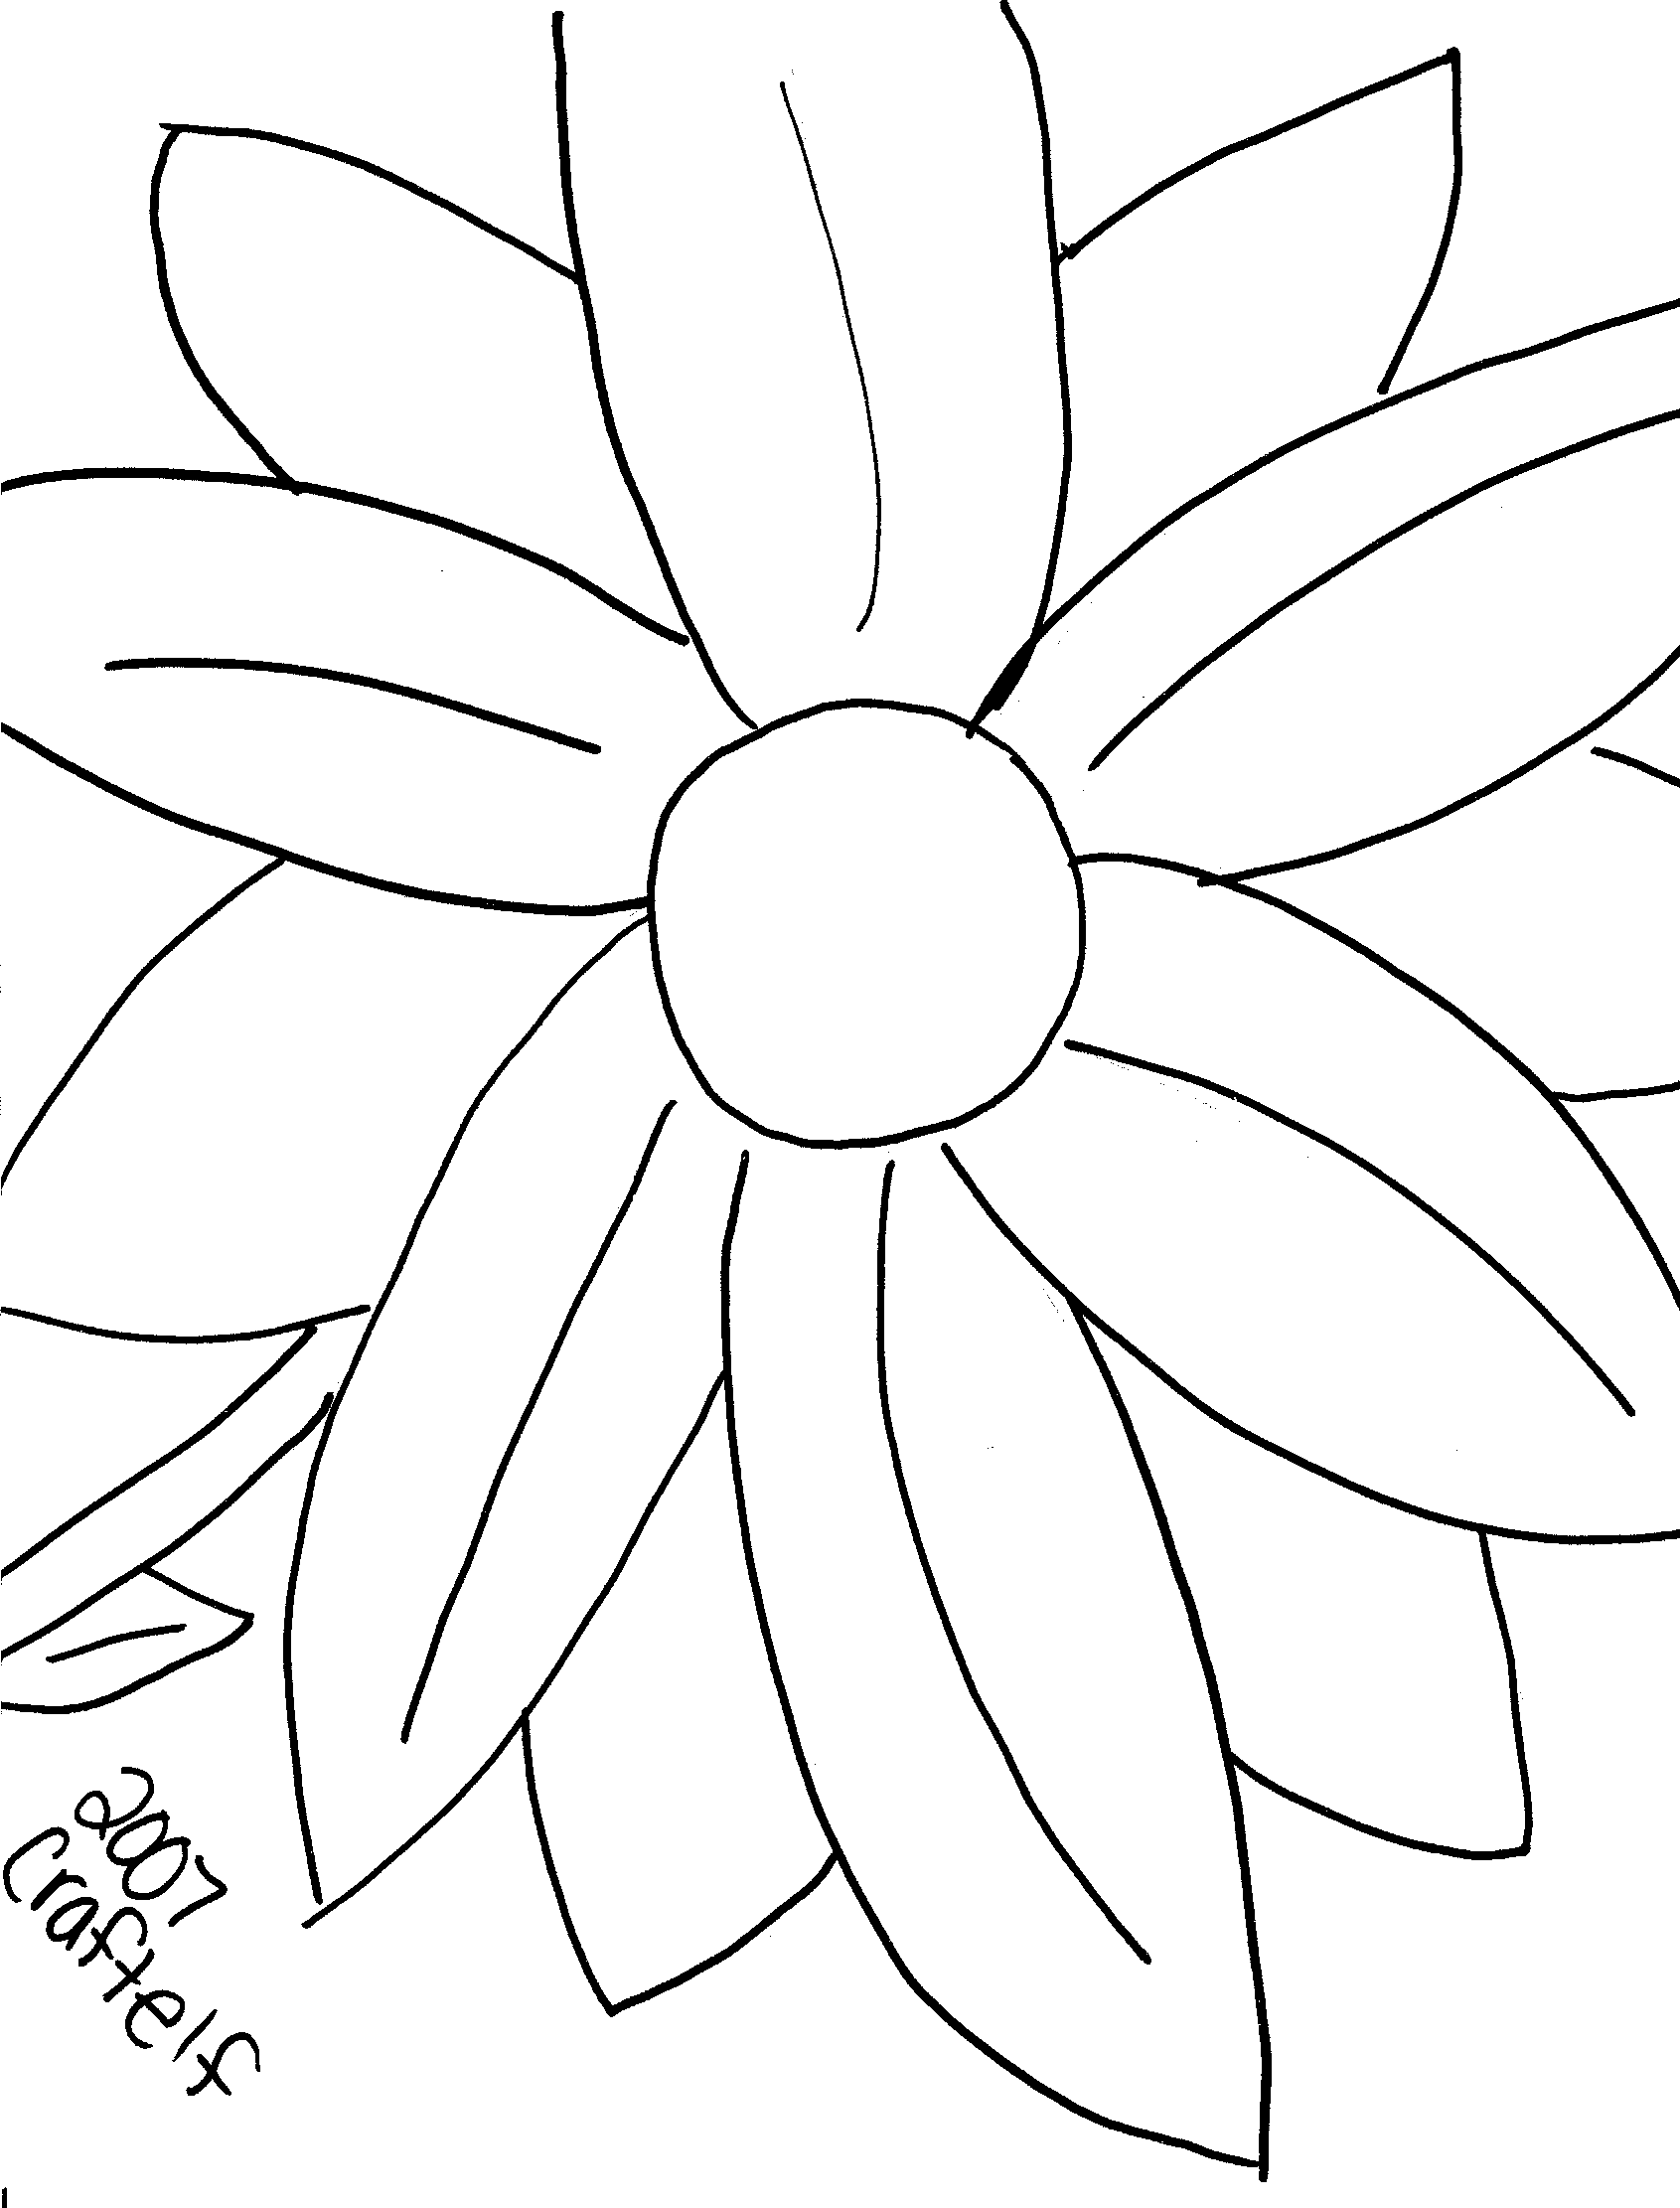 Free Flower Petals Coloring Pages - Coloring Home